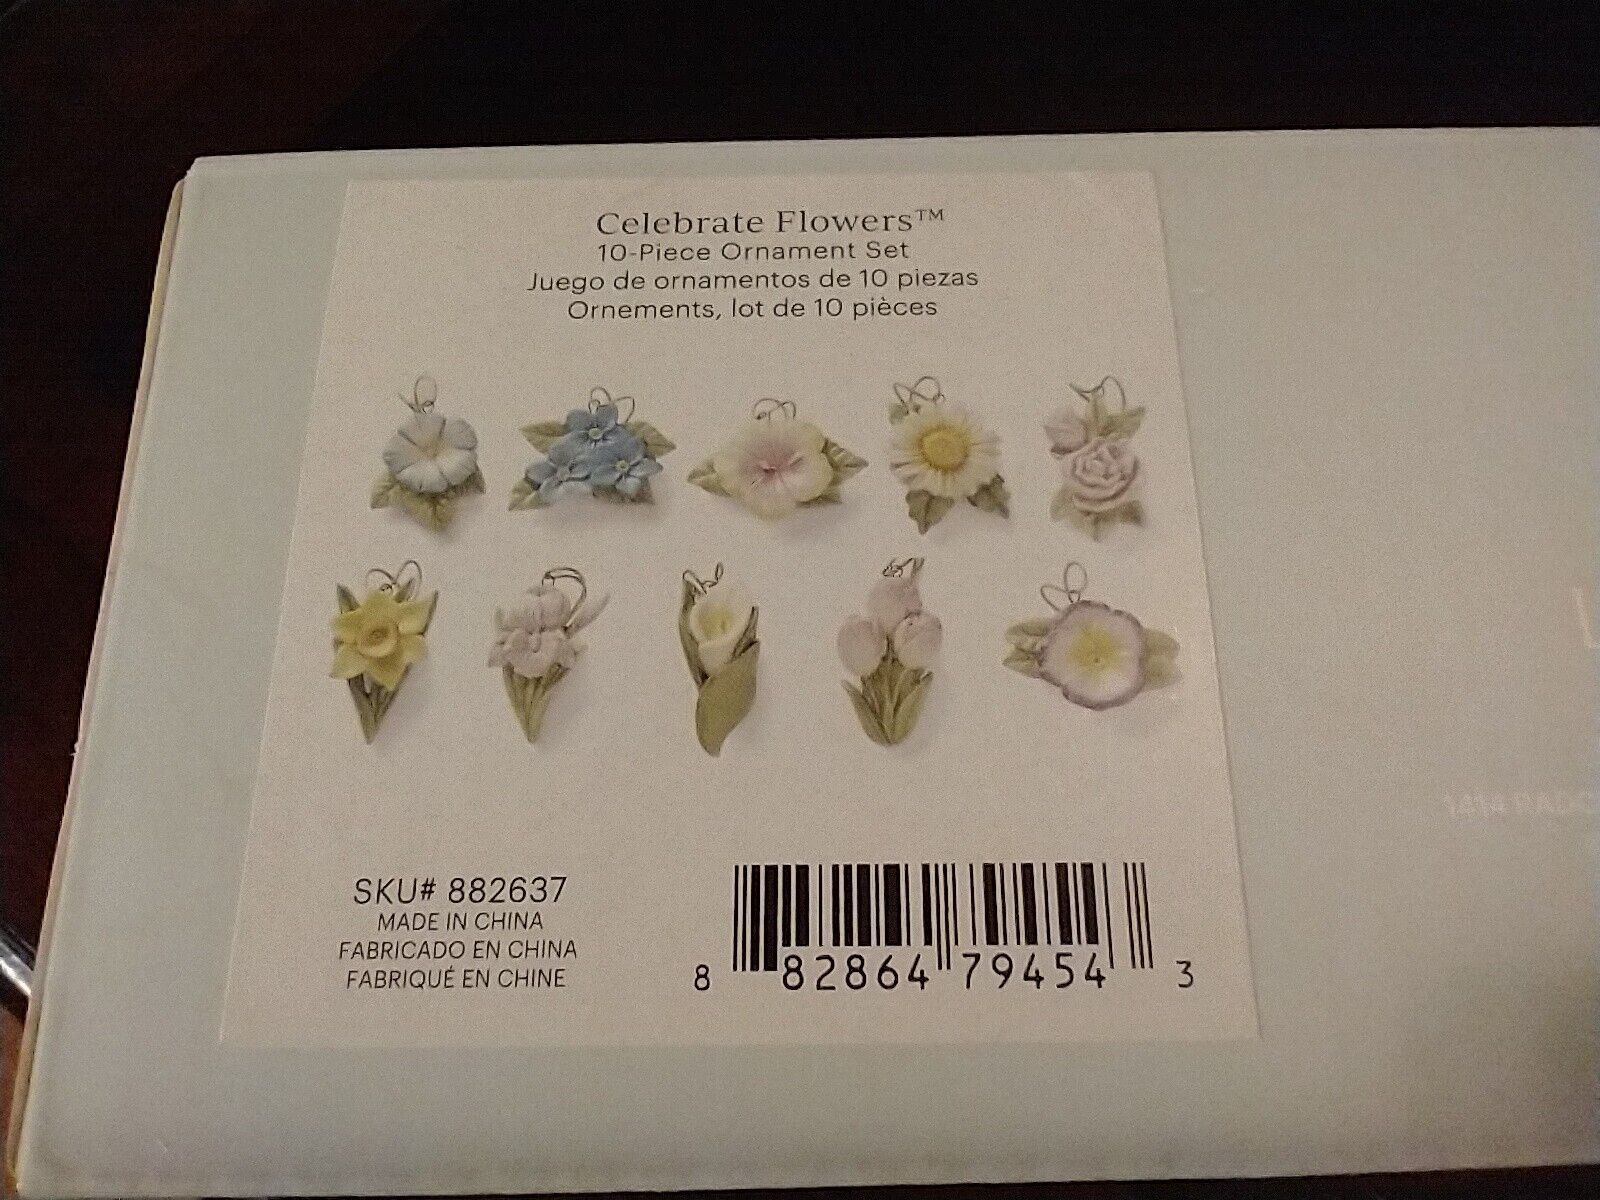 Boxed Set of 10 Lenox China Miniature Celebrate Flowers Ornaments New in Box